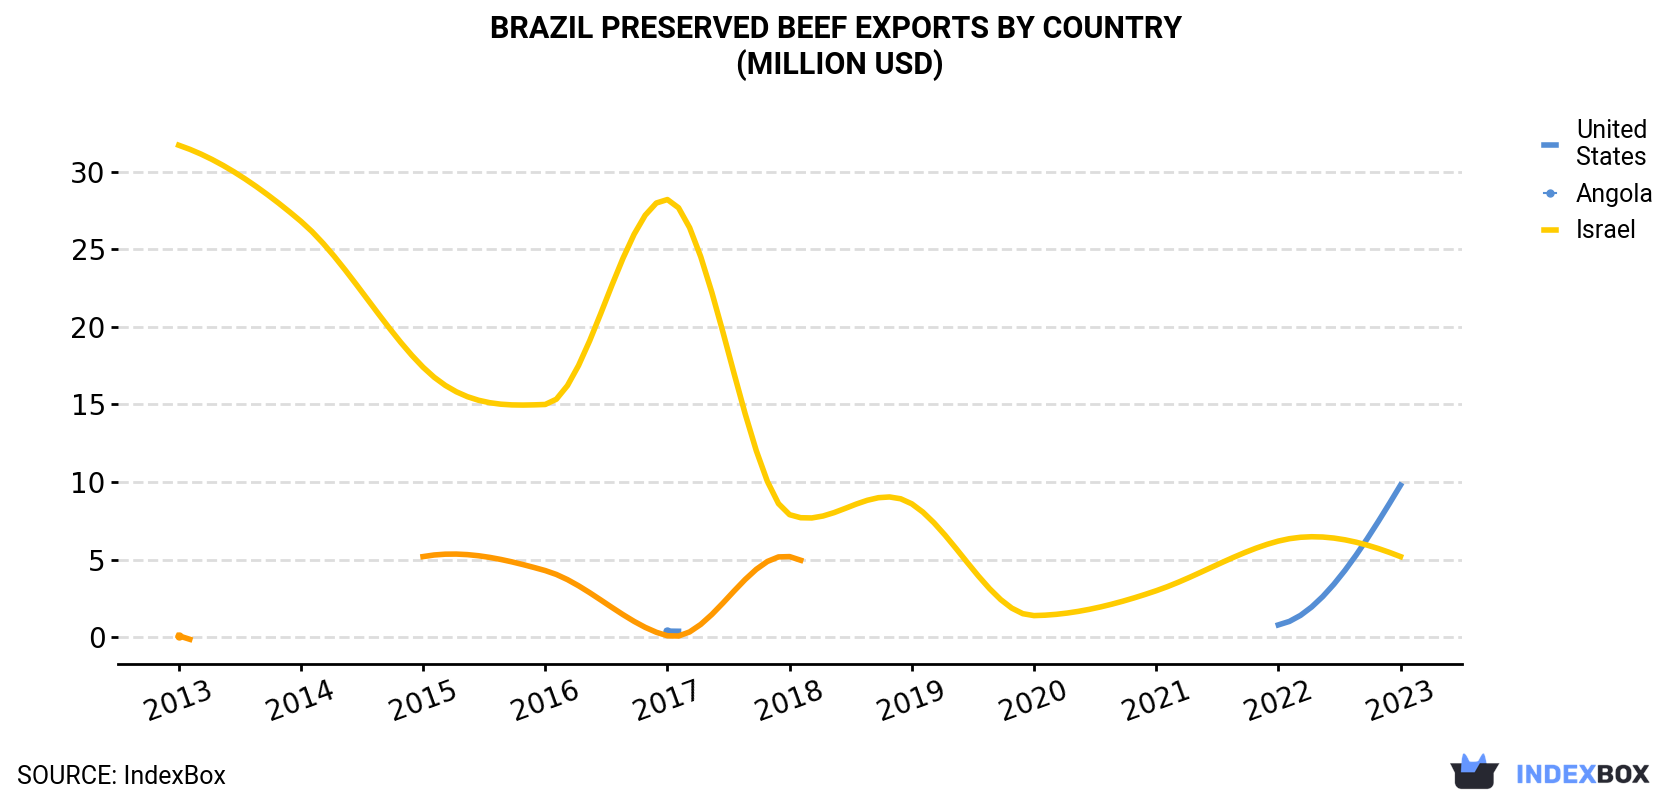 Brazil Preserved Beef Exports By Country (Million USD)